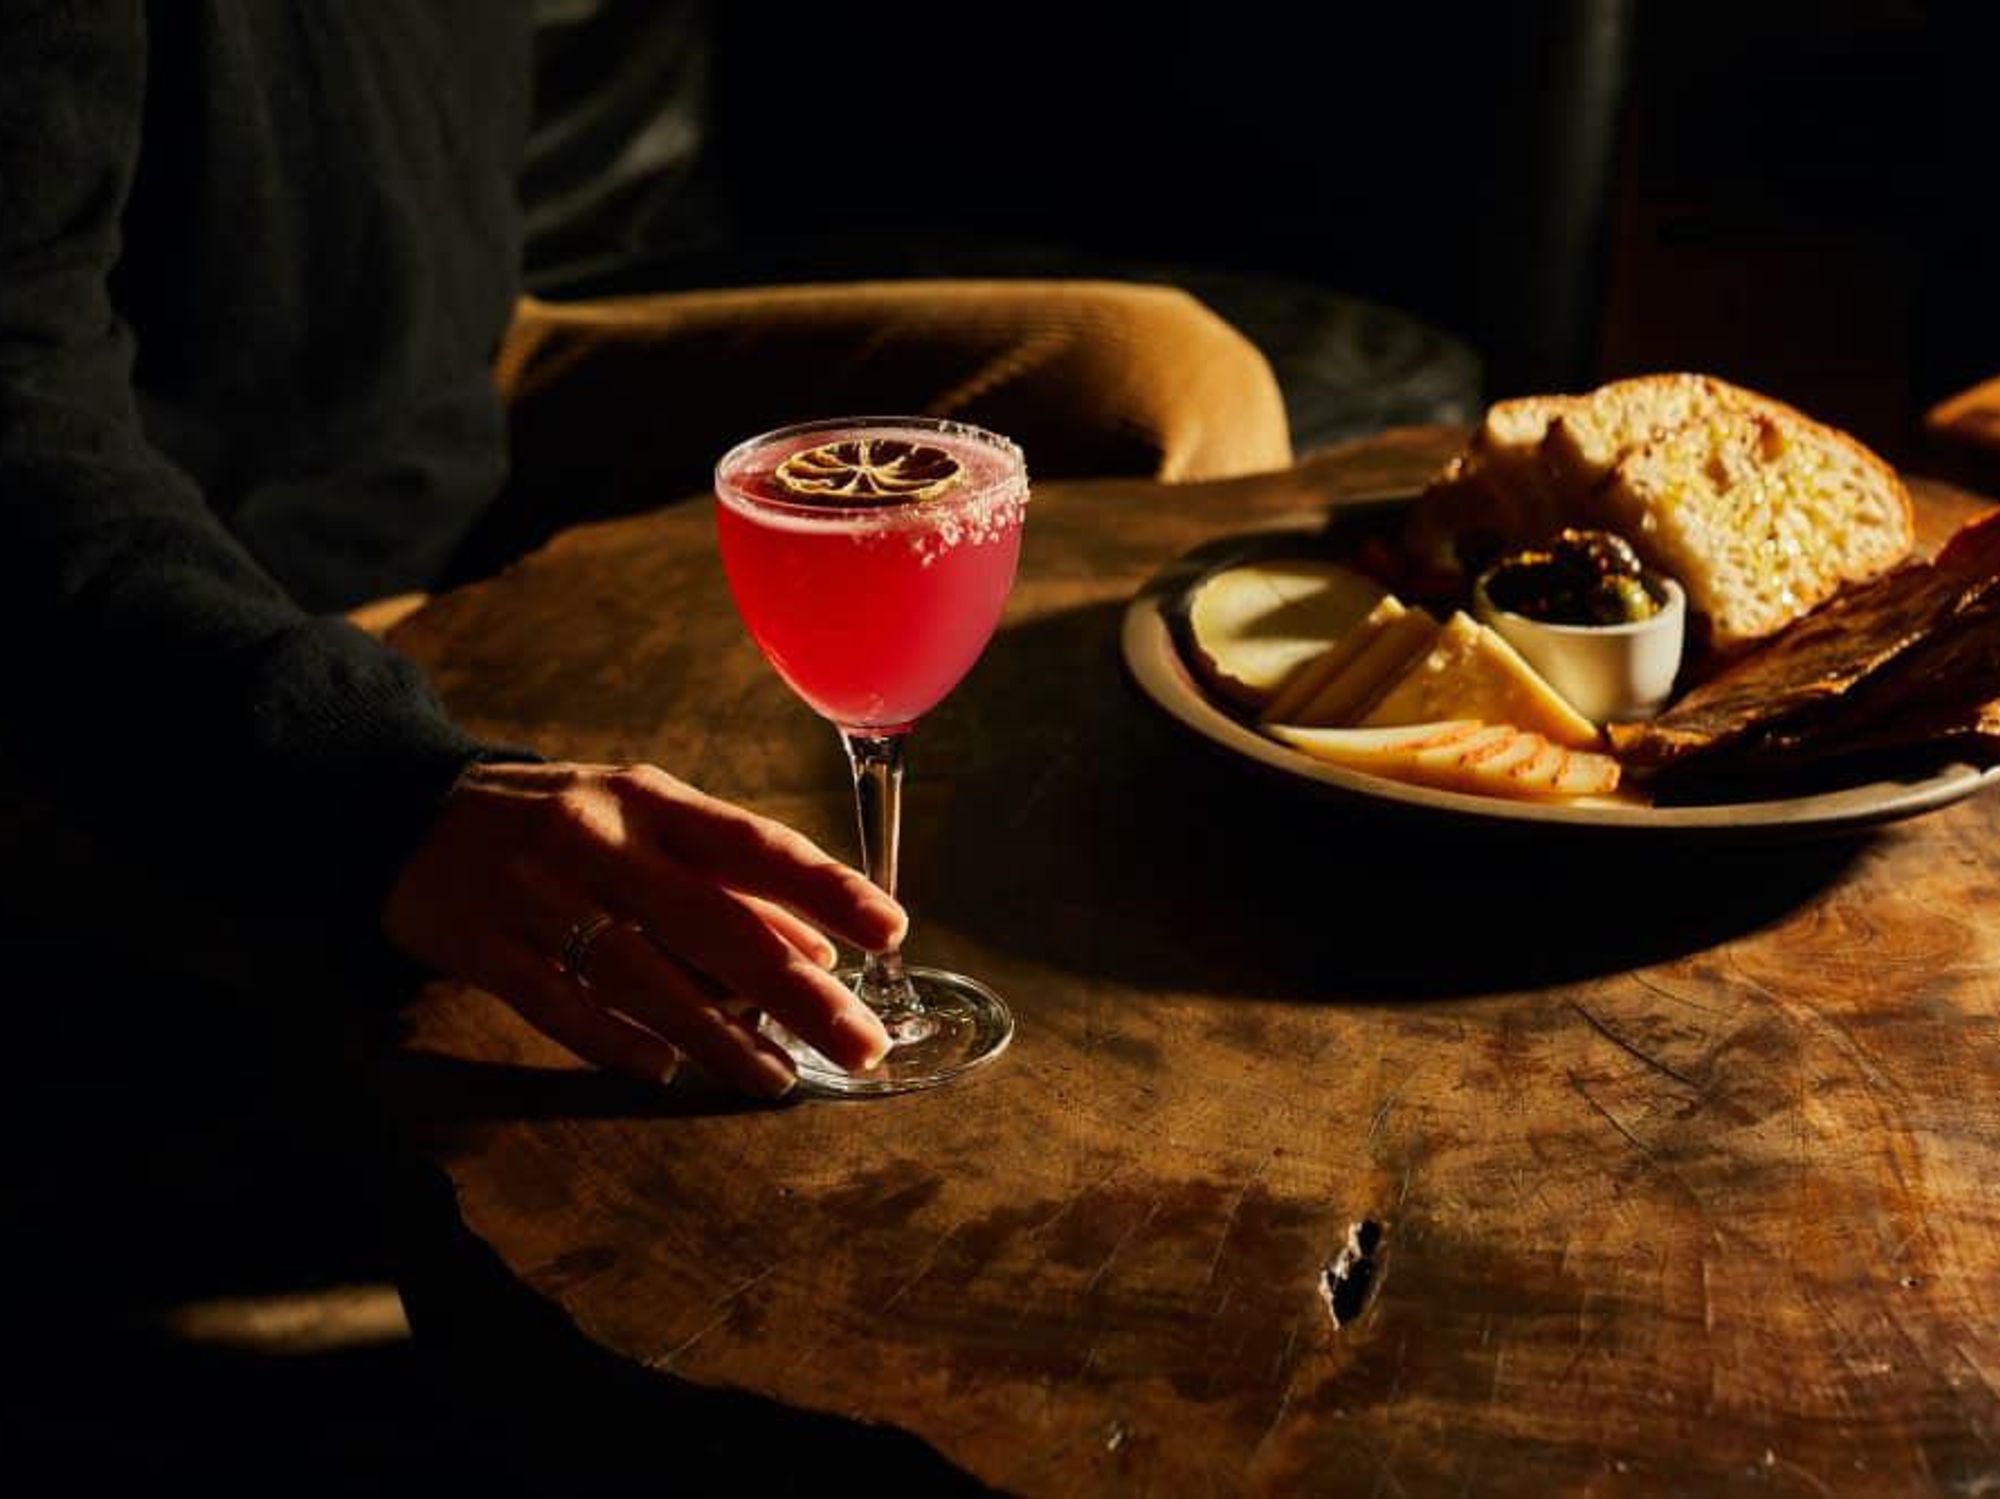 The Piedra de Sol Tequila, a habanero-hibiscus reduction with lime and smoked salt, now on the cocktail menu at Carpenter Coffee Bar.